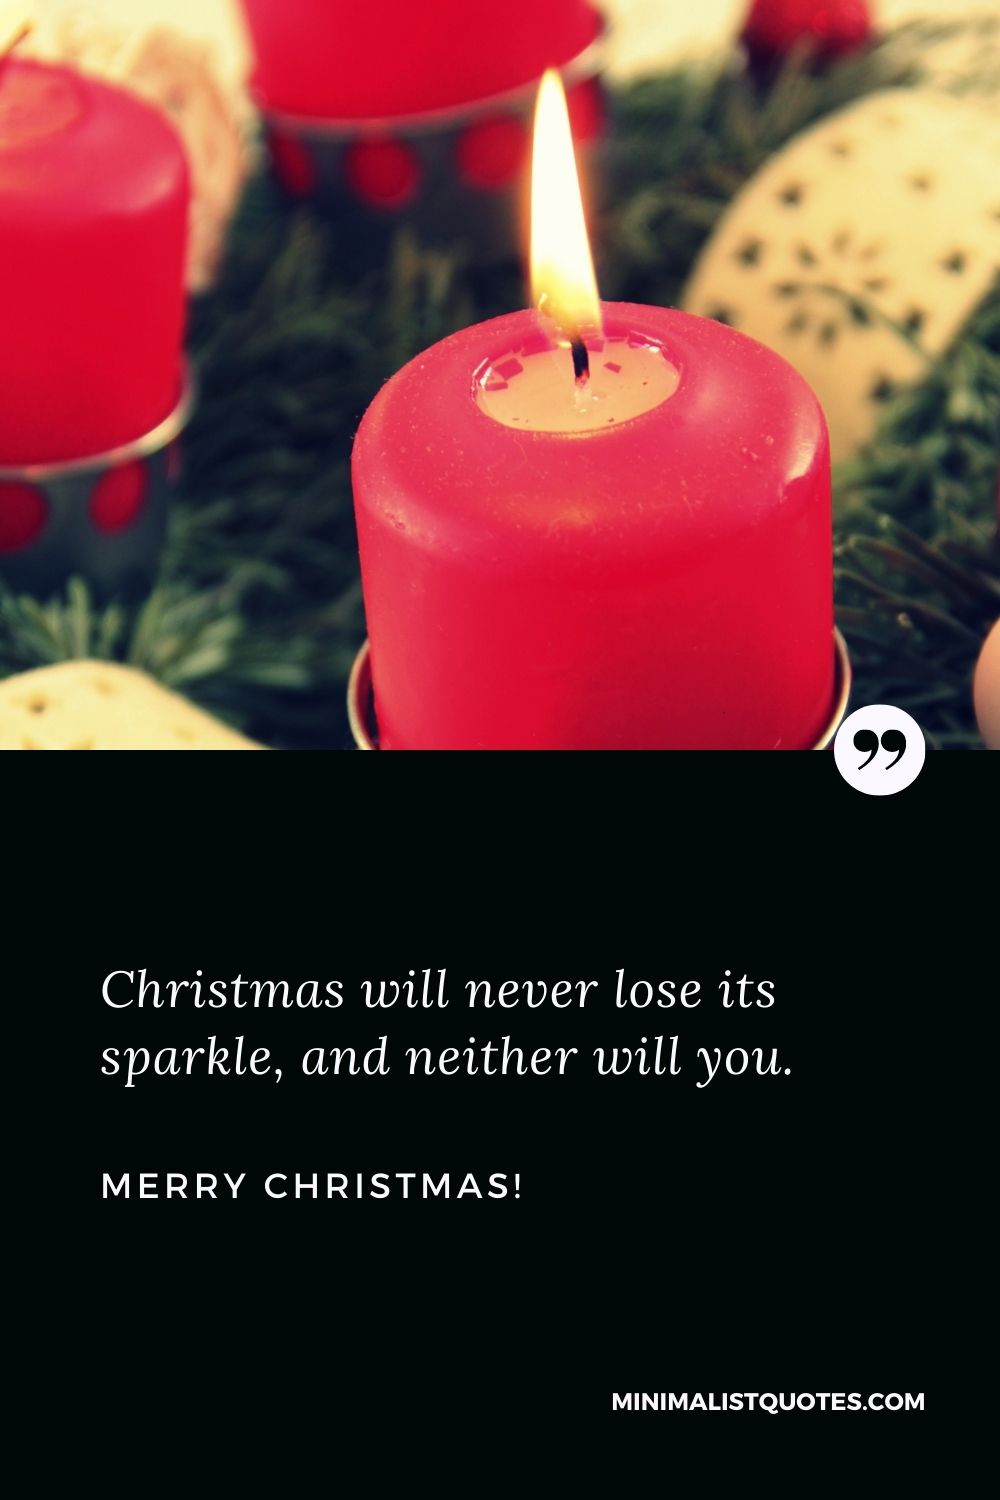 Beautiful Christmas Greetings: Christmas will never lose its sparkle, and neither will you. Merry Christmas!